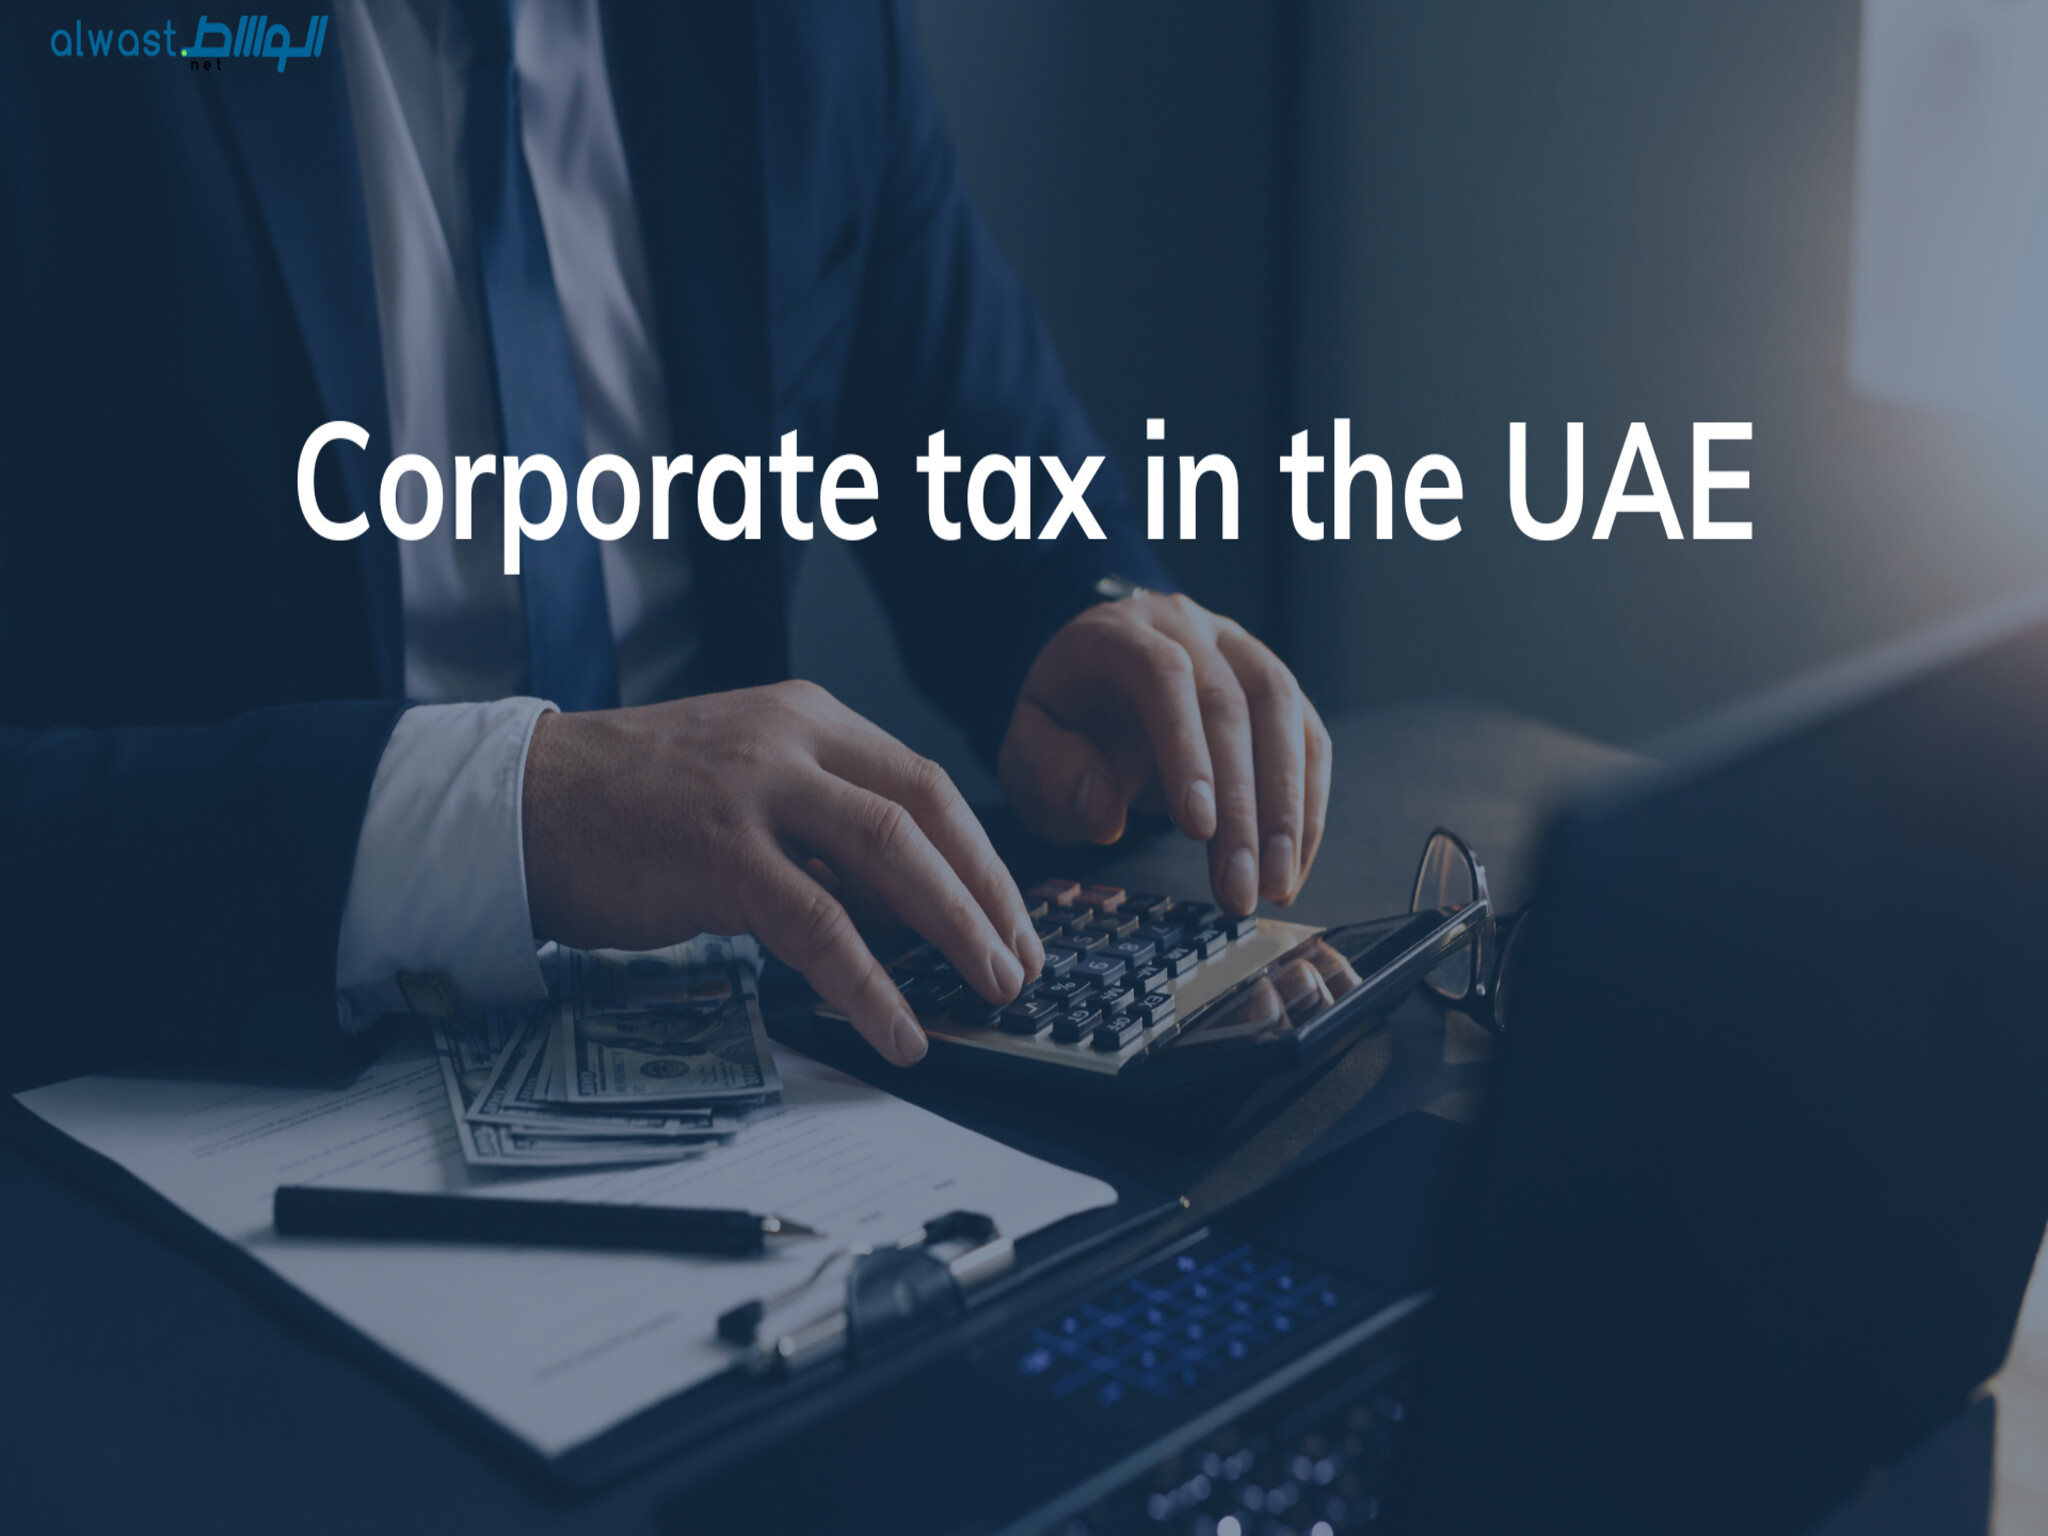 UAE Urges corporate taxpayers to submit registrations by June 30 or face fines